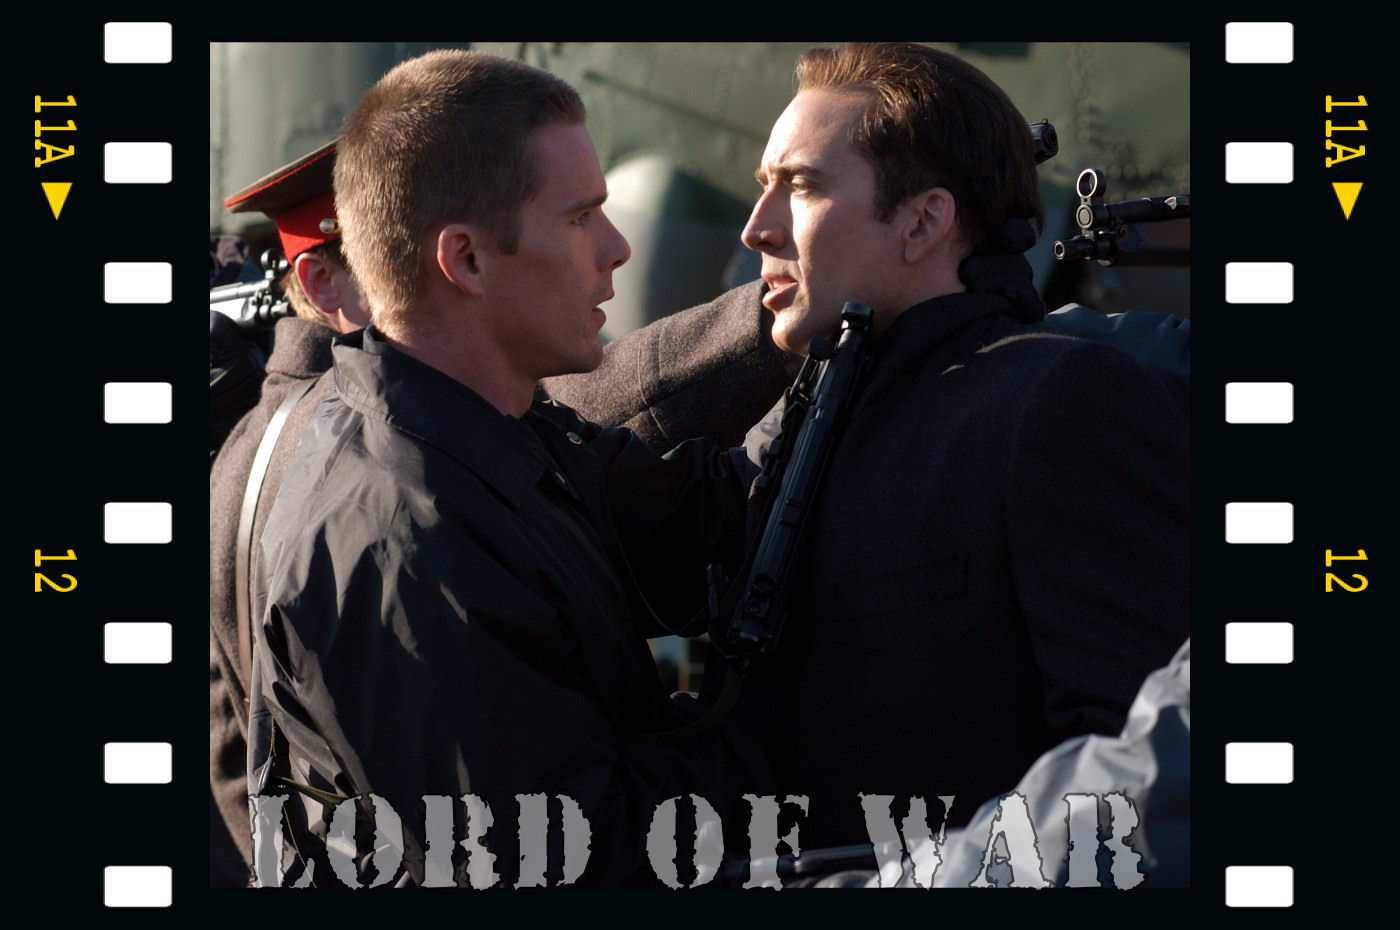 Lord of war 2